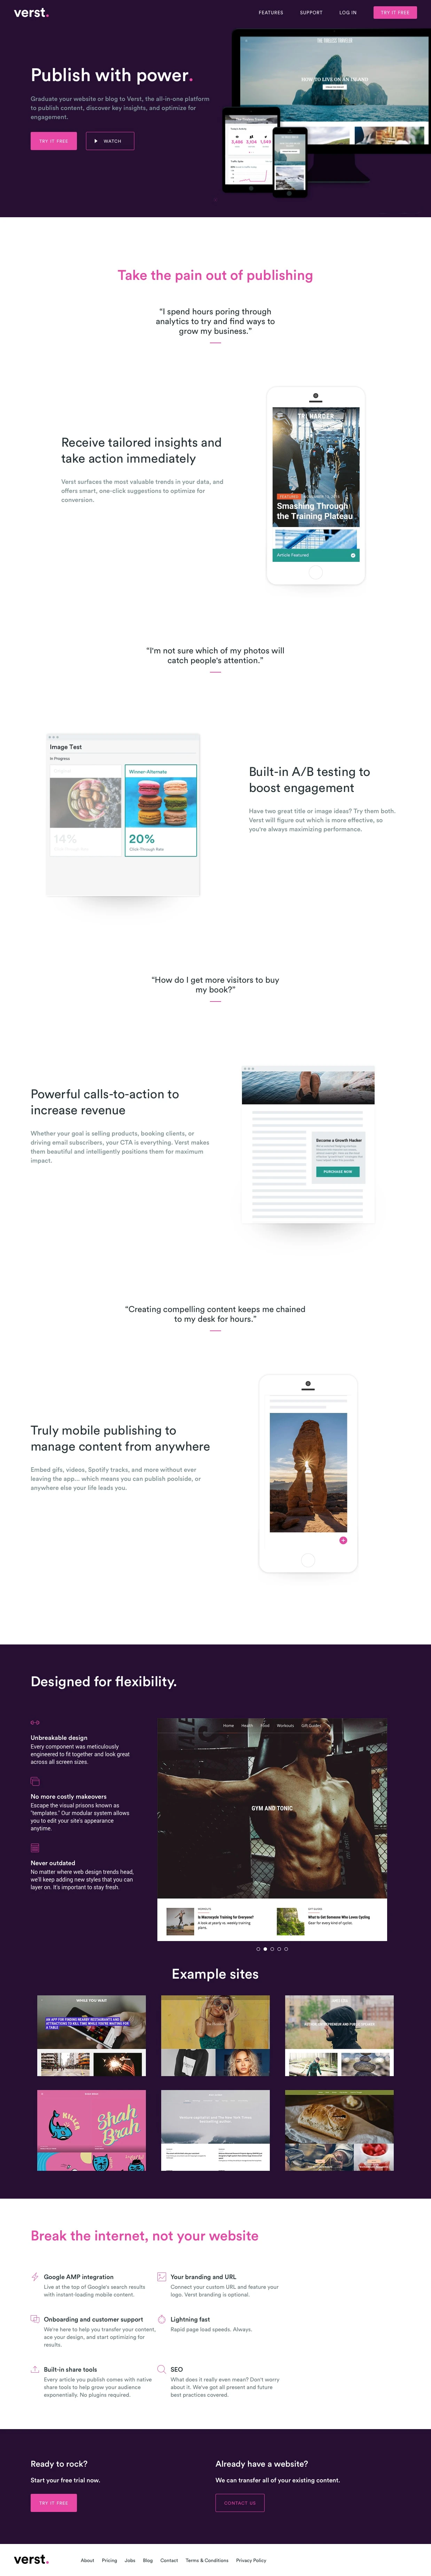 Verst Landing Page Example: Graduate your website or blog to Verst, the all-in-one platform to publish content, discover key insights, and optimize for engagement.